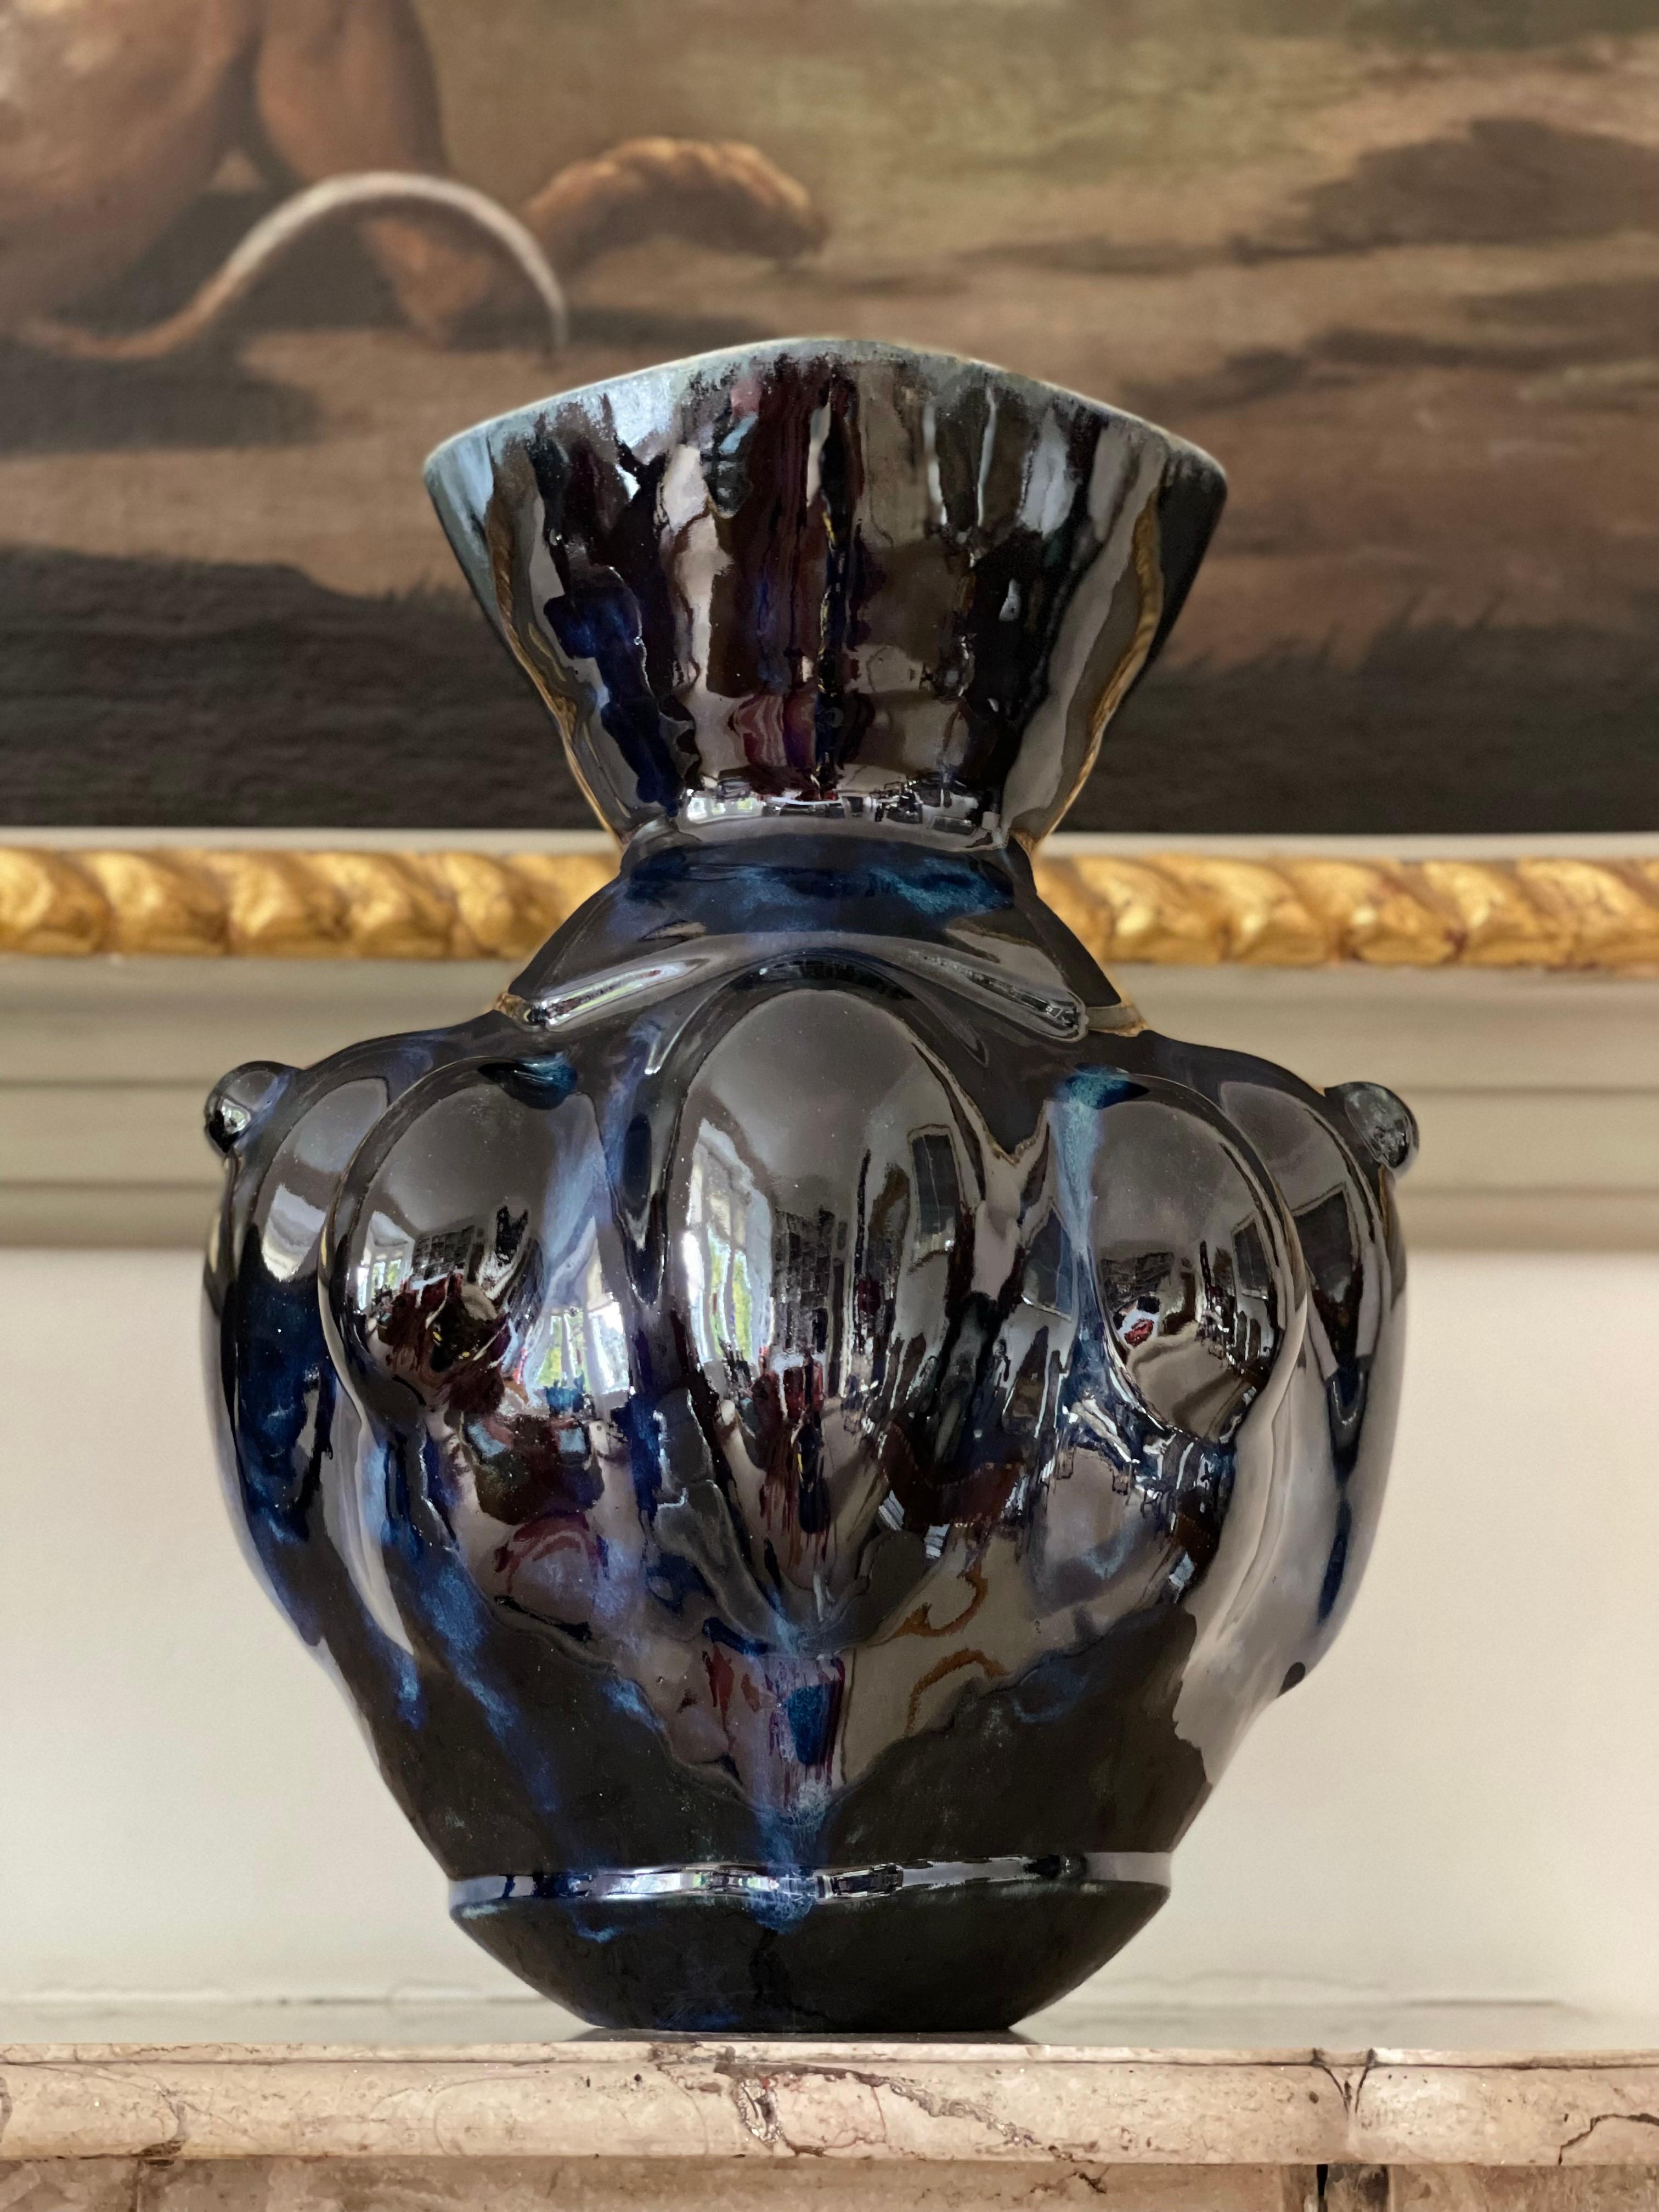 Violante Lodolo D'Oria, deep blue globule vase, 2021, glazed stoneware. W26cm x H36cm

New stunning piece created by ceramic artist Violante Lodolo d' Oria. The layering of different glazes creates shimmering and ever-changing effects under